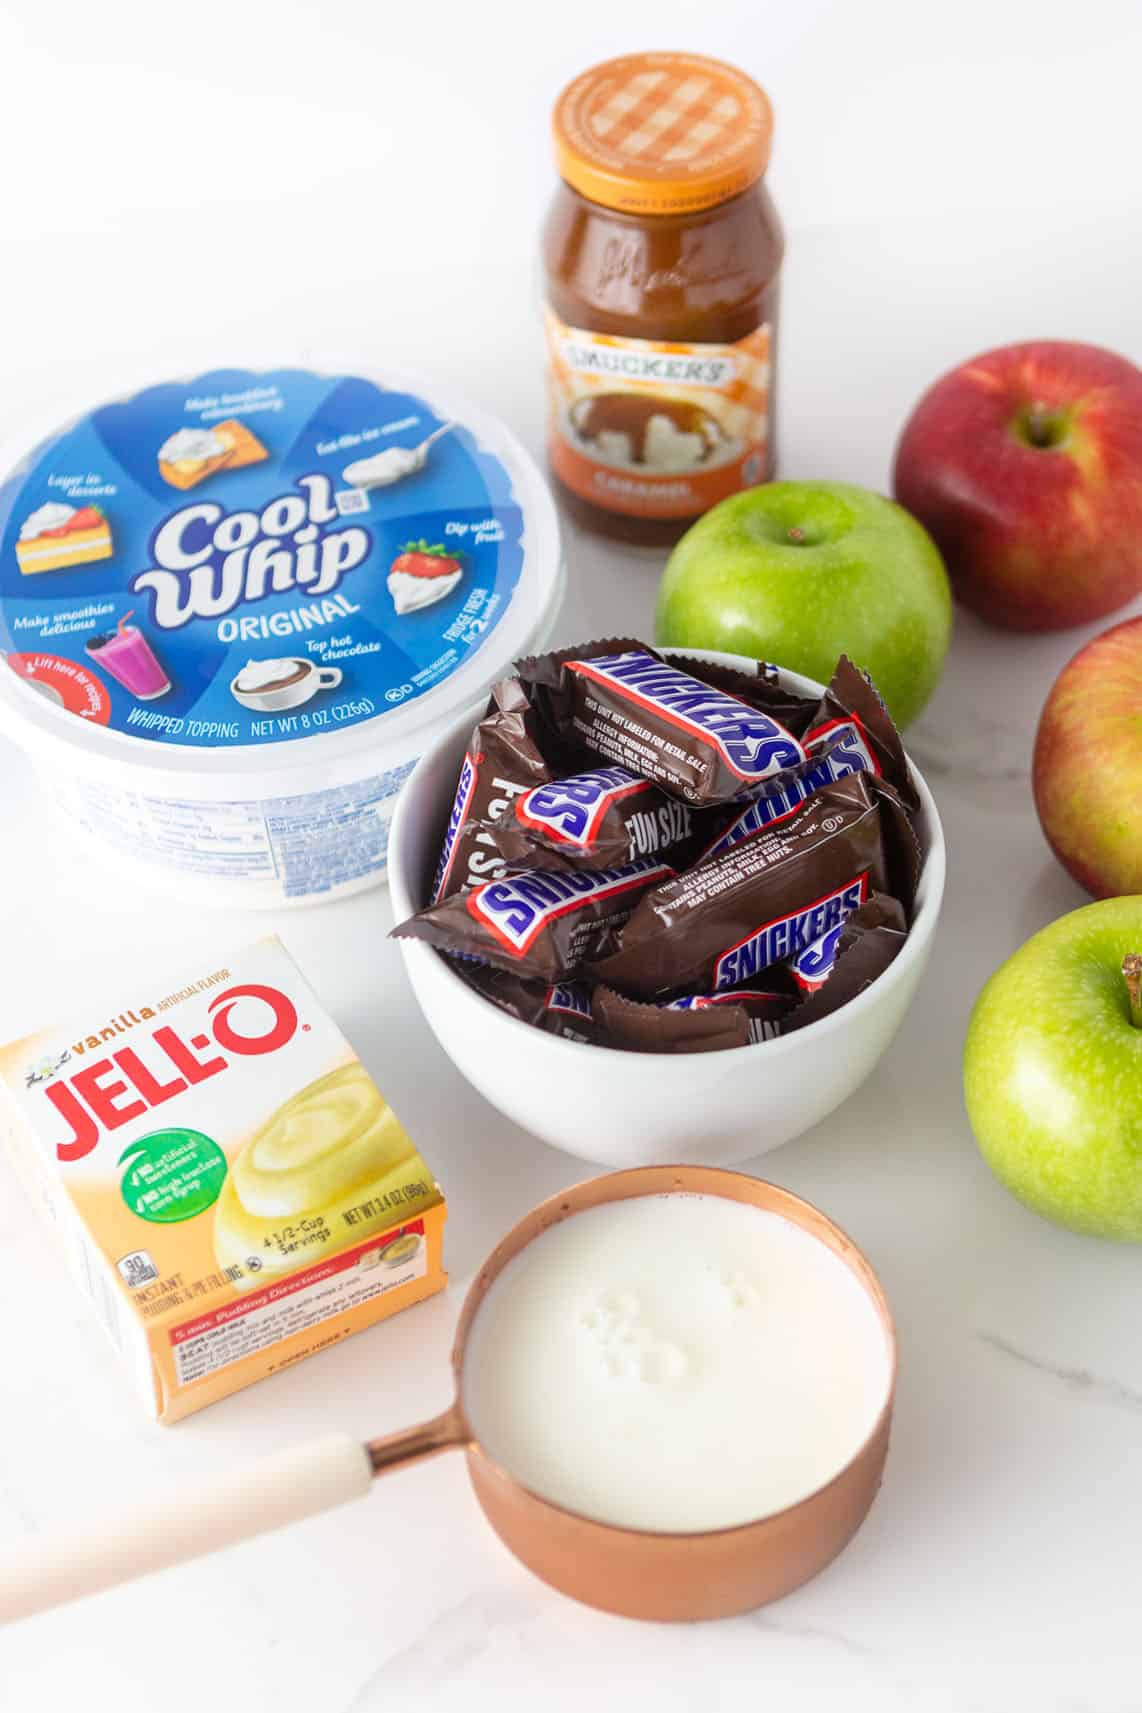 Ingredients for apple snickers salad; includes bowl of snickers, cool whip, a box of instant vanilla pudding mix, milk, apples, and a jar of Smuckers caramel sauce